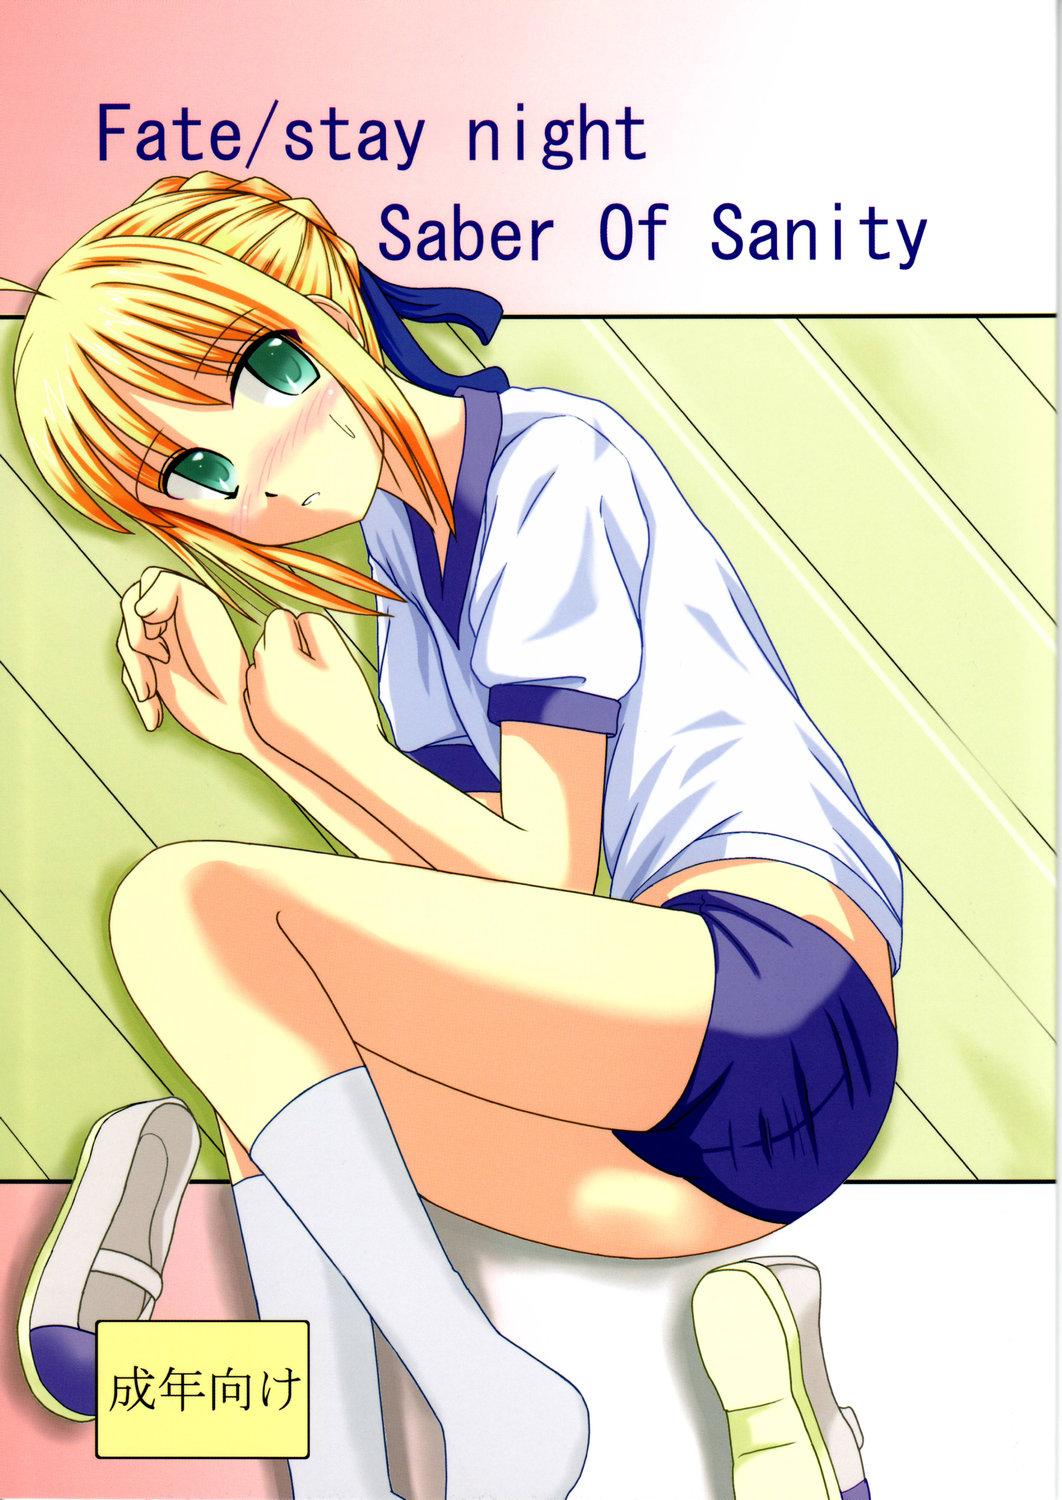 Uncensored Saber Of Sanity - Fate stay night Furry - Page 1